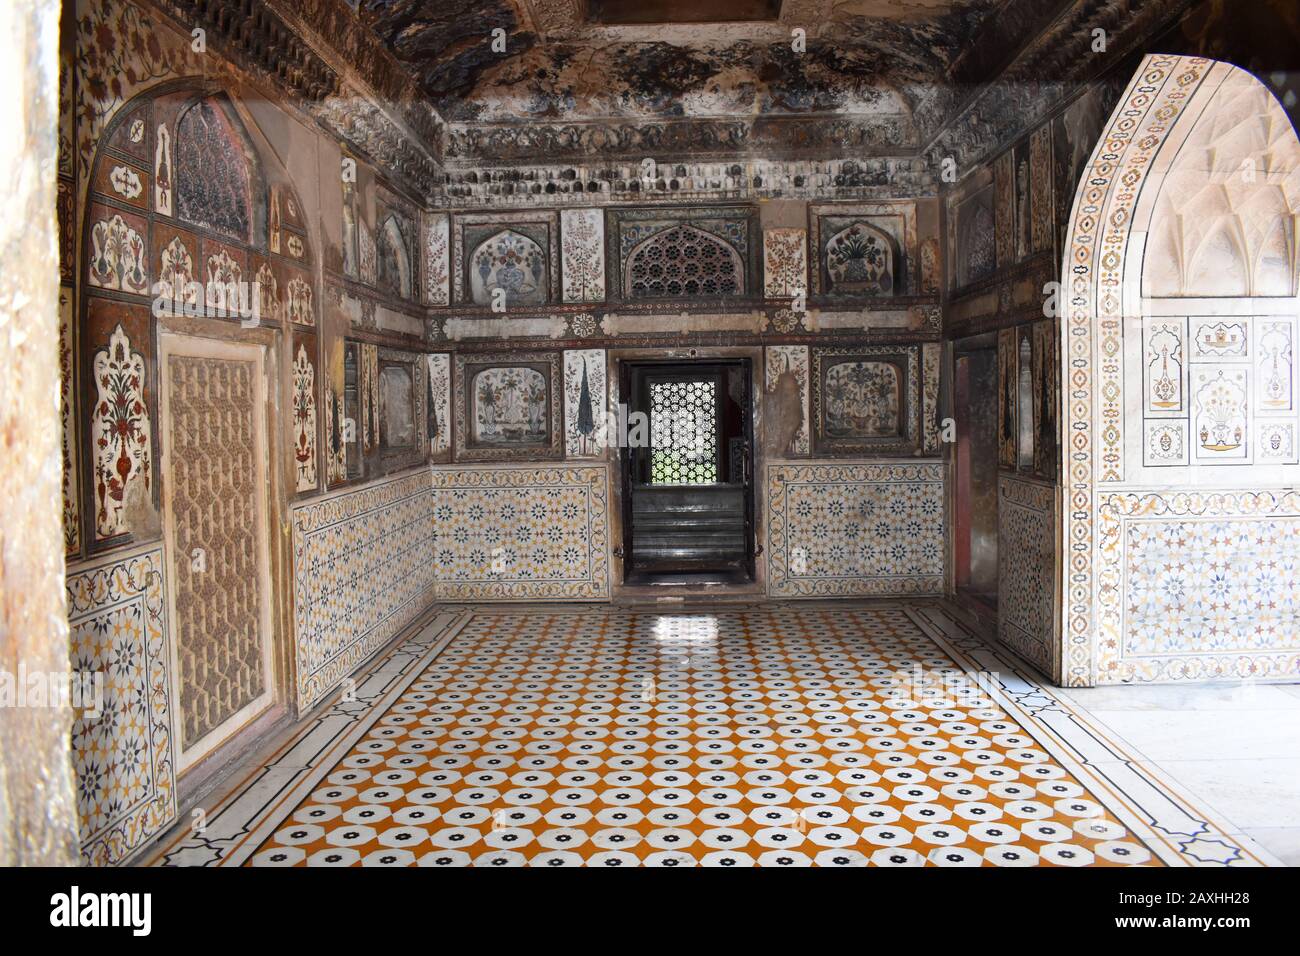 Walls and the ceilings encrusted with multi-colored stone pattern at Mausoleum of Etmaduddaula or Itmad-ud-Daula tomb often regarded as a draft of the Stock Photo